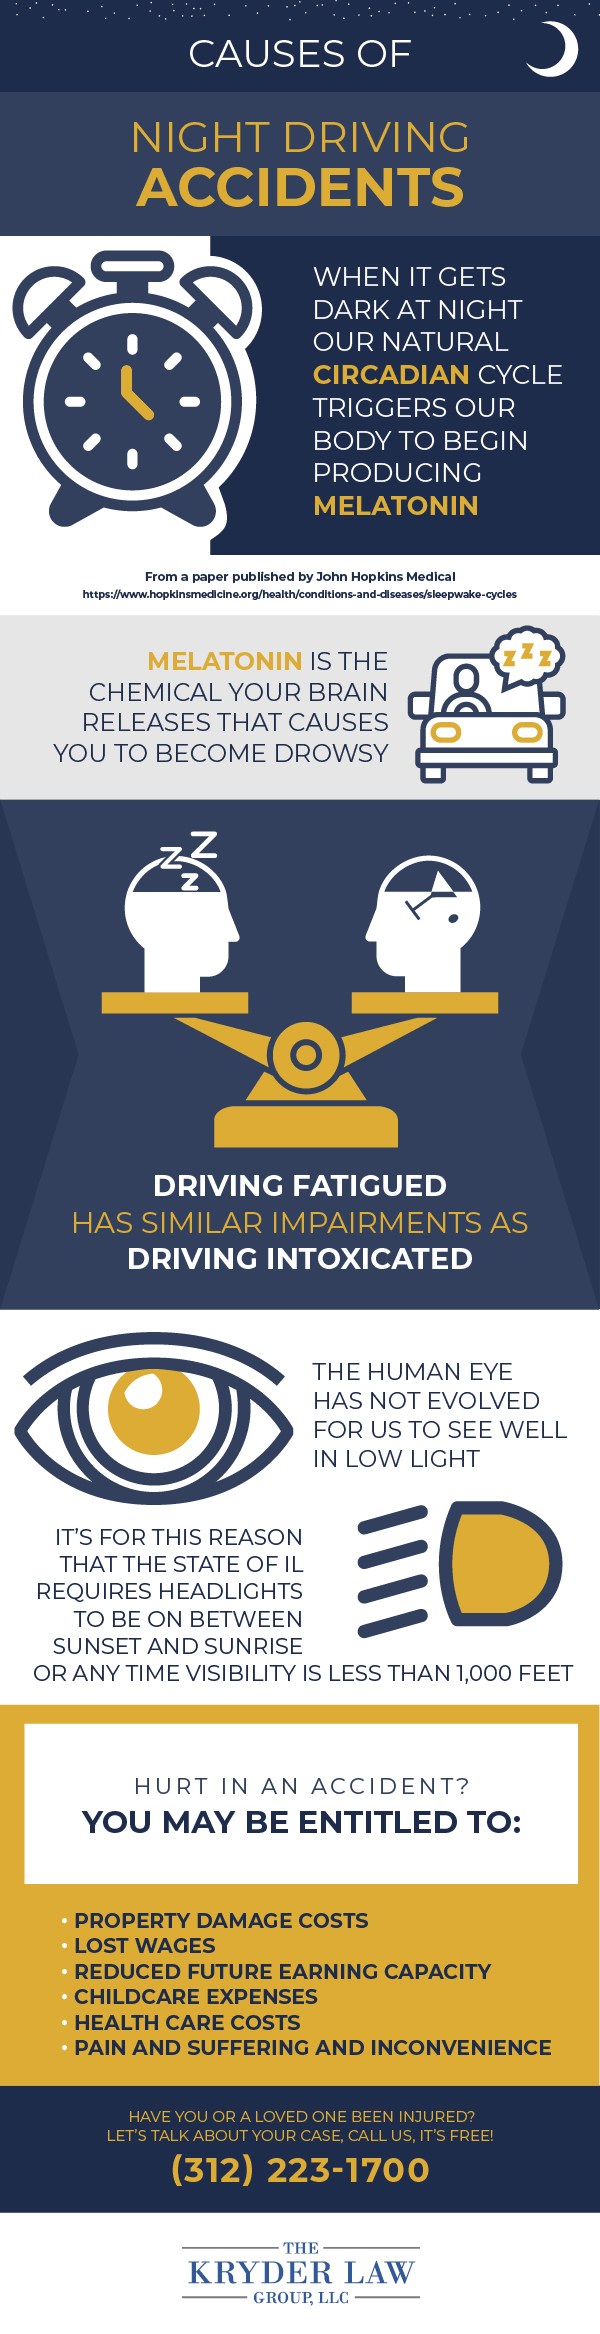 Causes of Night Driving Accidents Infographic